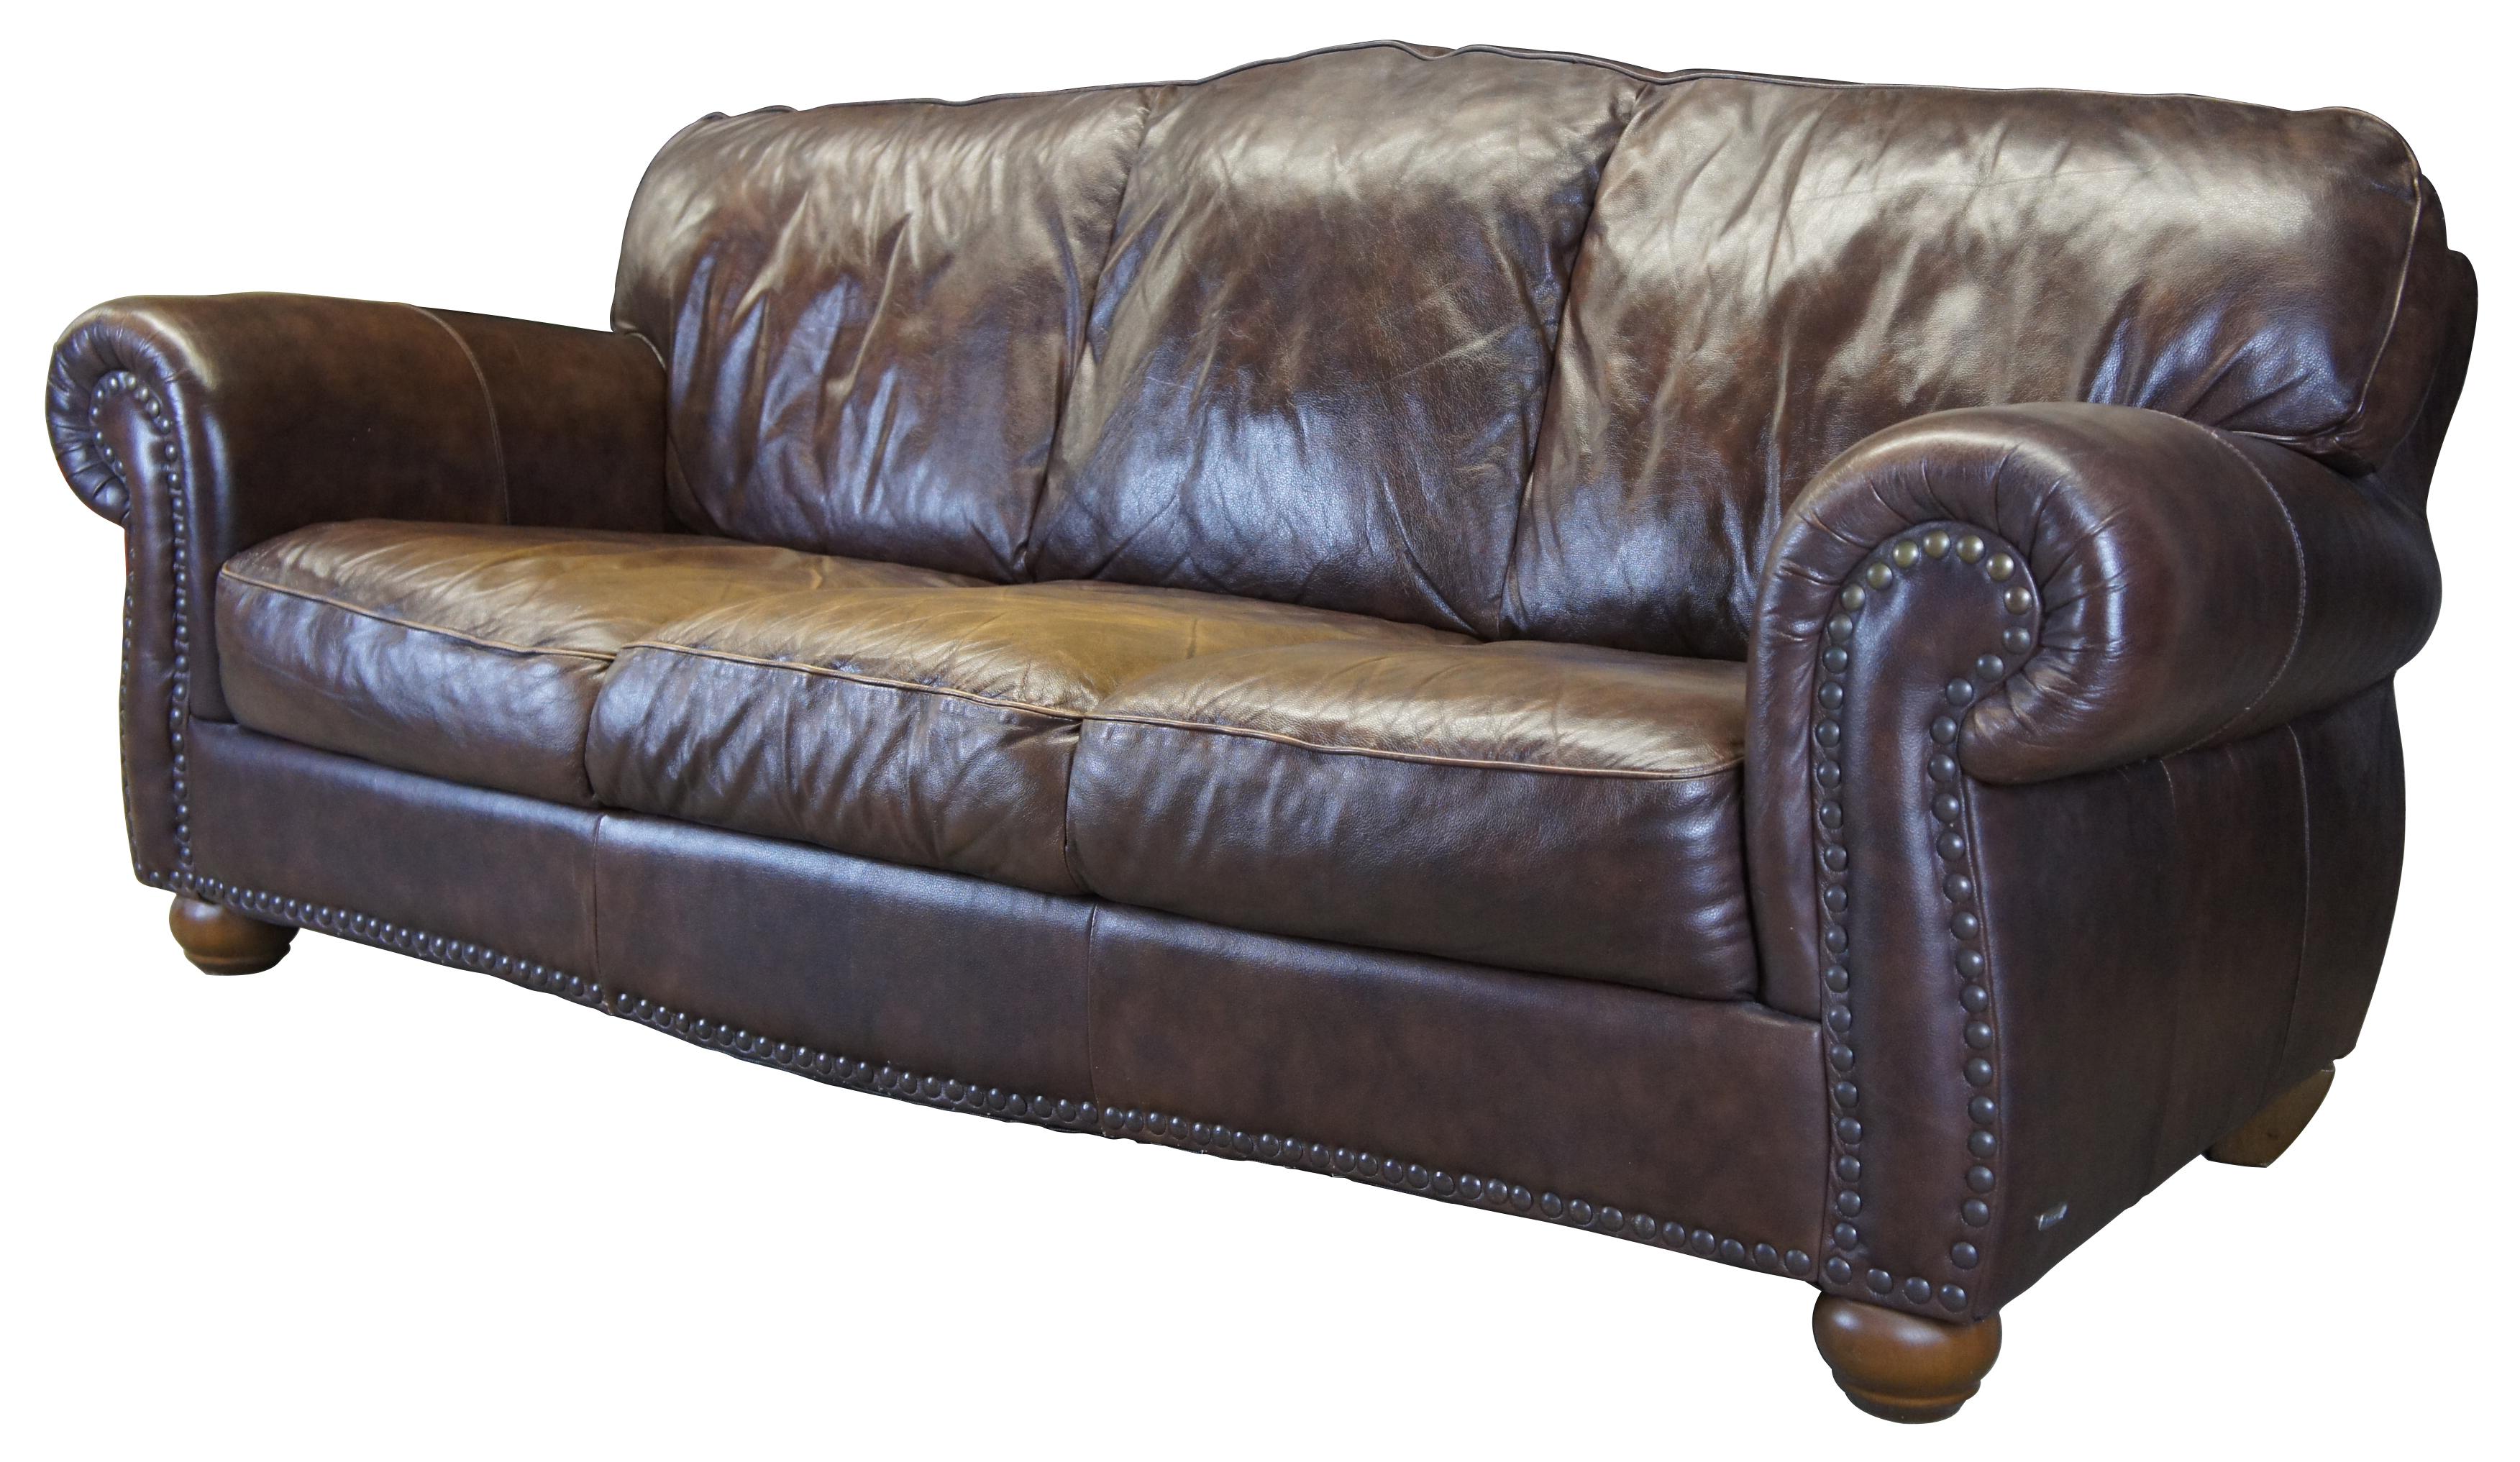 Italsofa top grain brown leather 3-seat sofa. Features a camelback and flared arms over bun feet. Accented with nailhead trim.
   